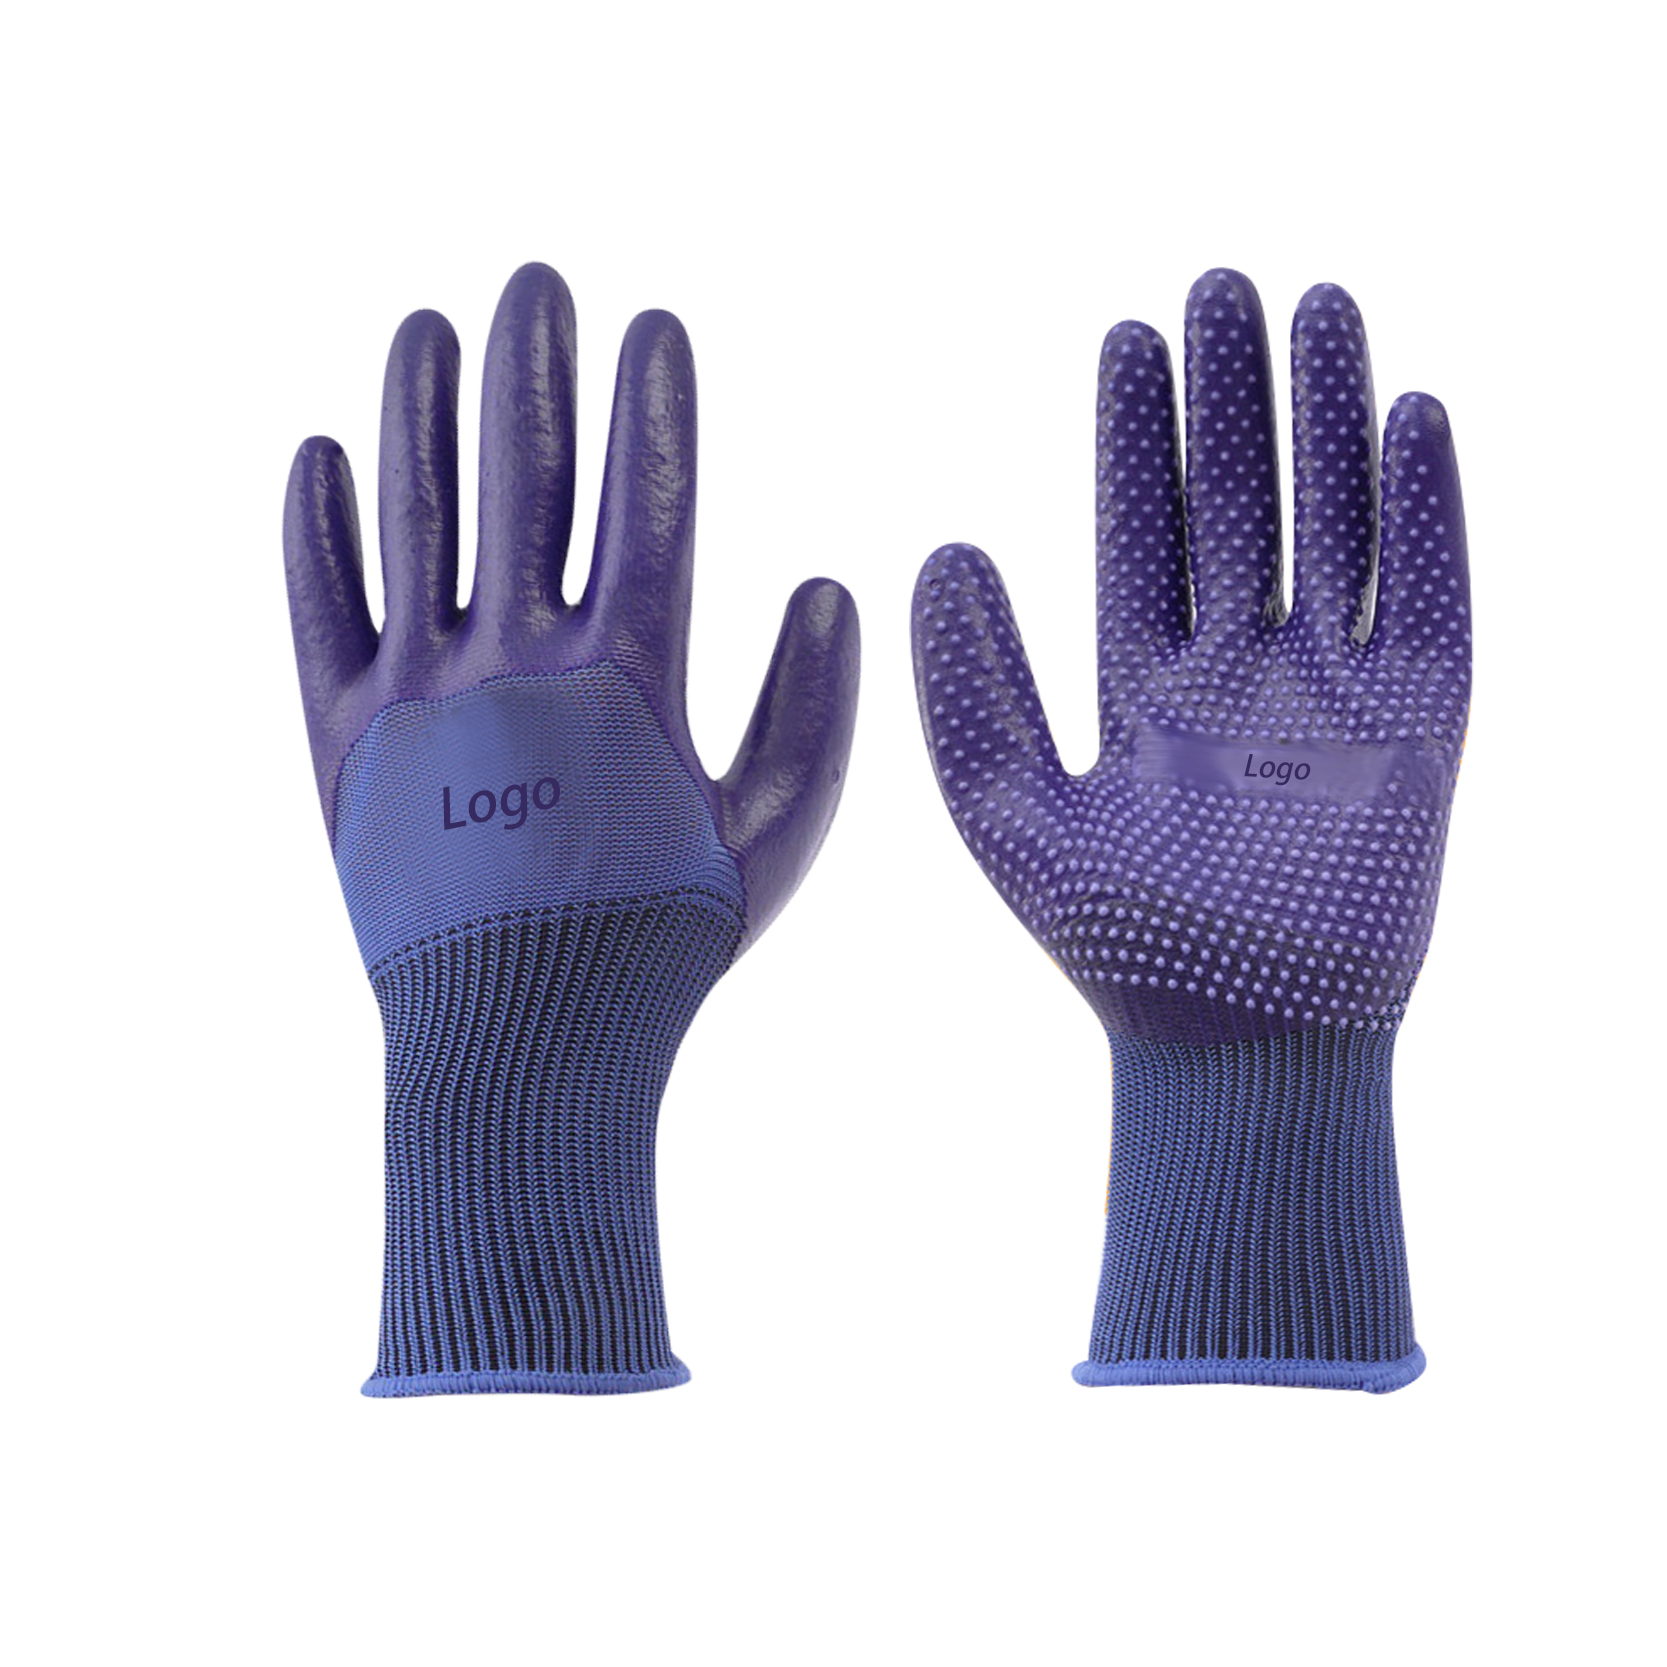 Custom Made Work Gloves General Purpose Work Safety Gloves With Pvc Dots Coated Featured Duab